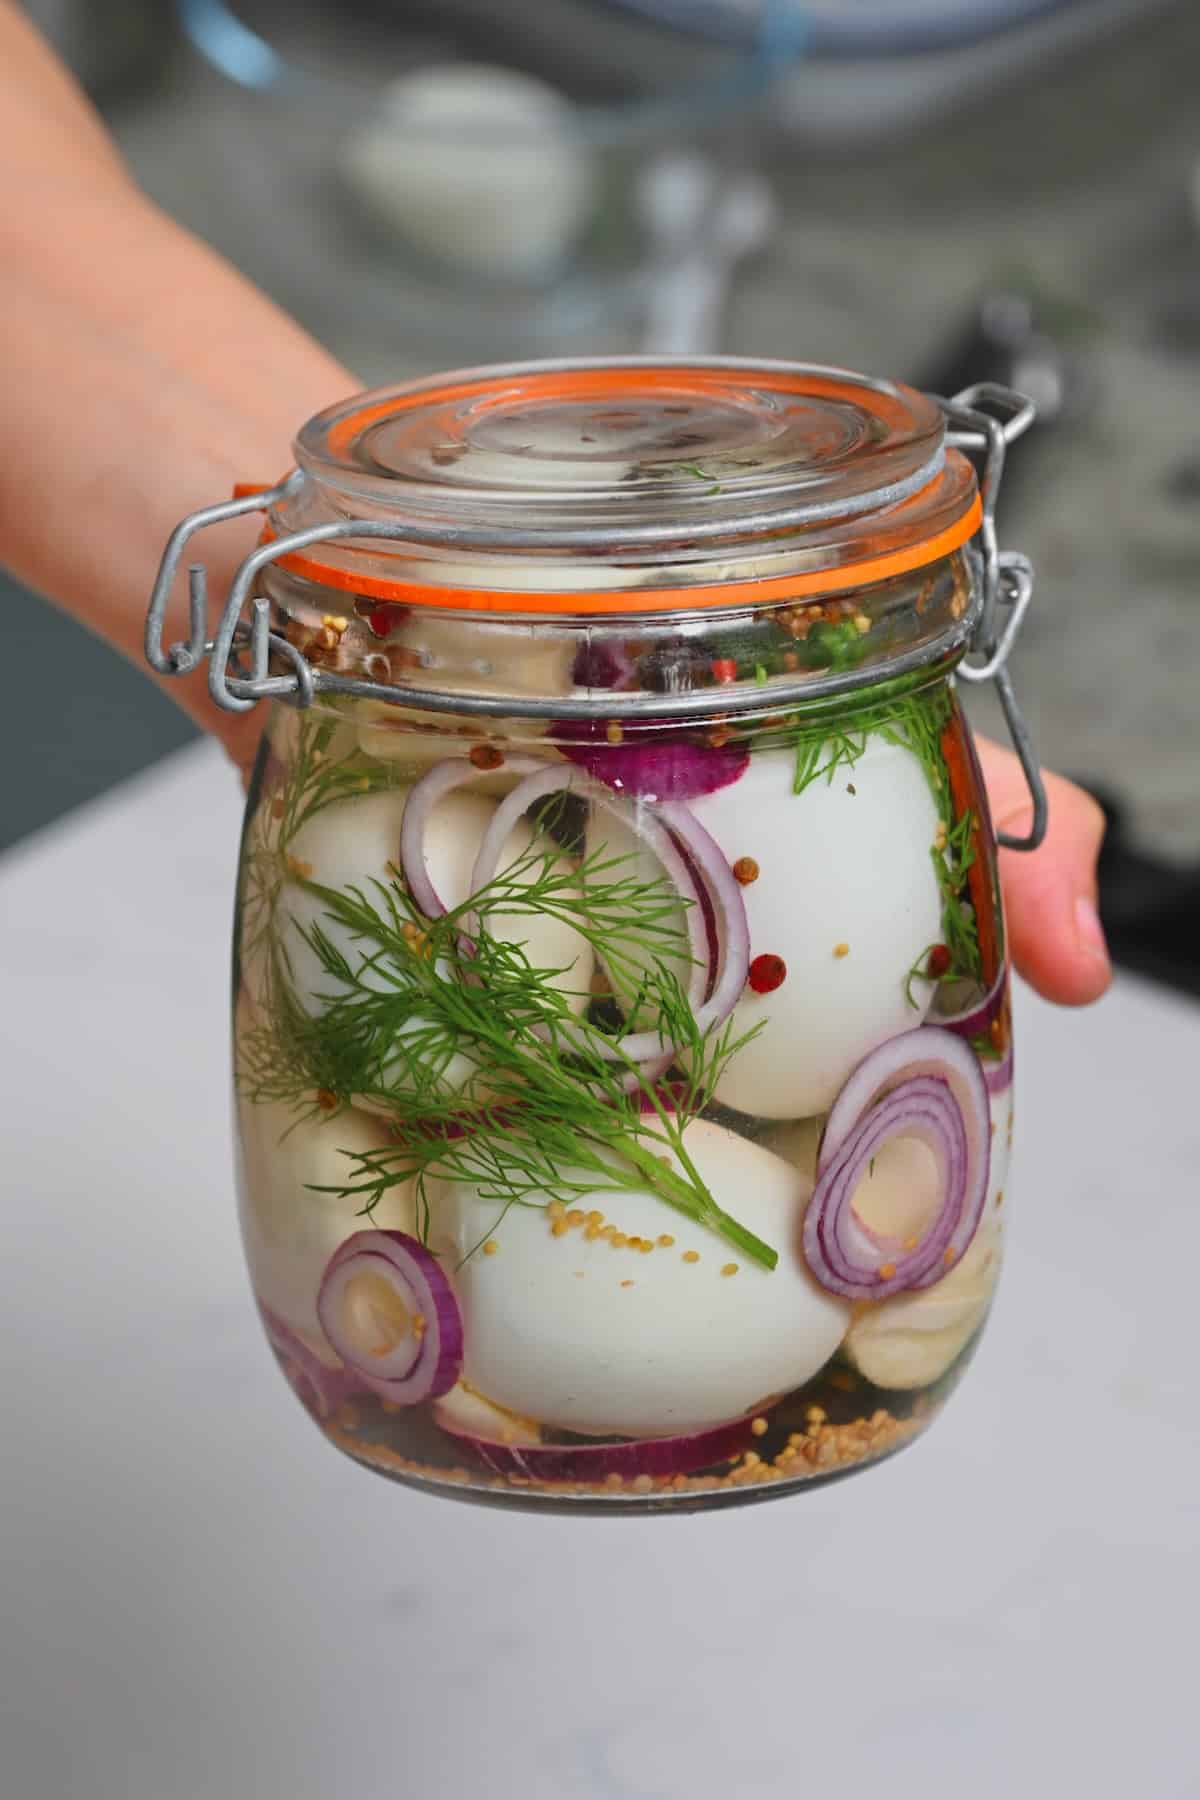 Pickled eggs in a jar